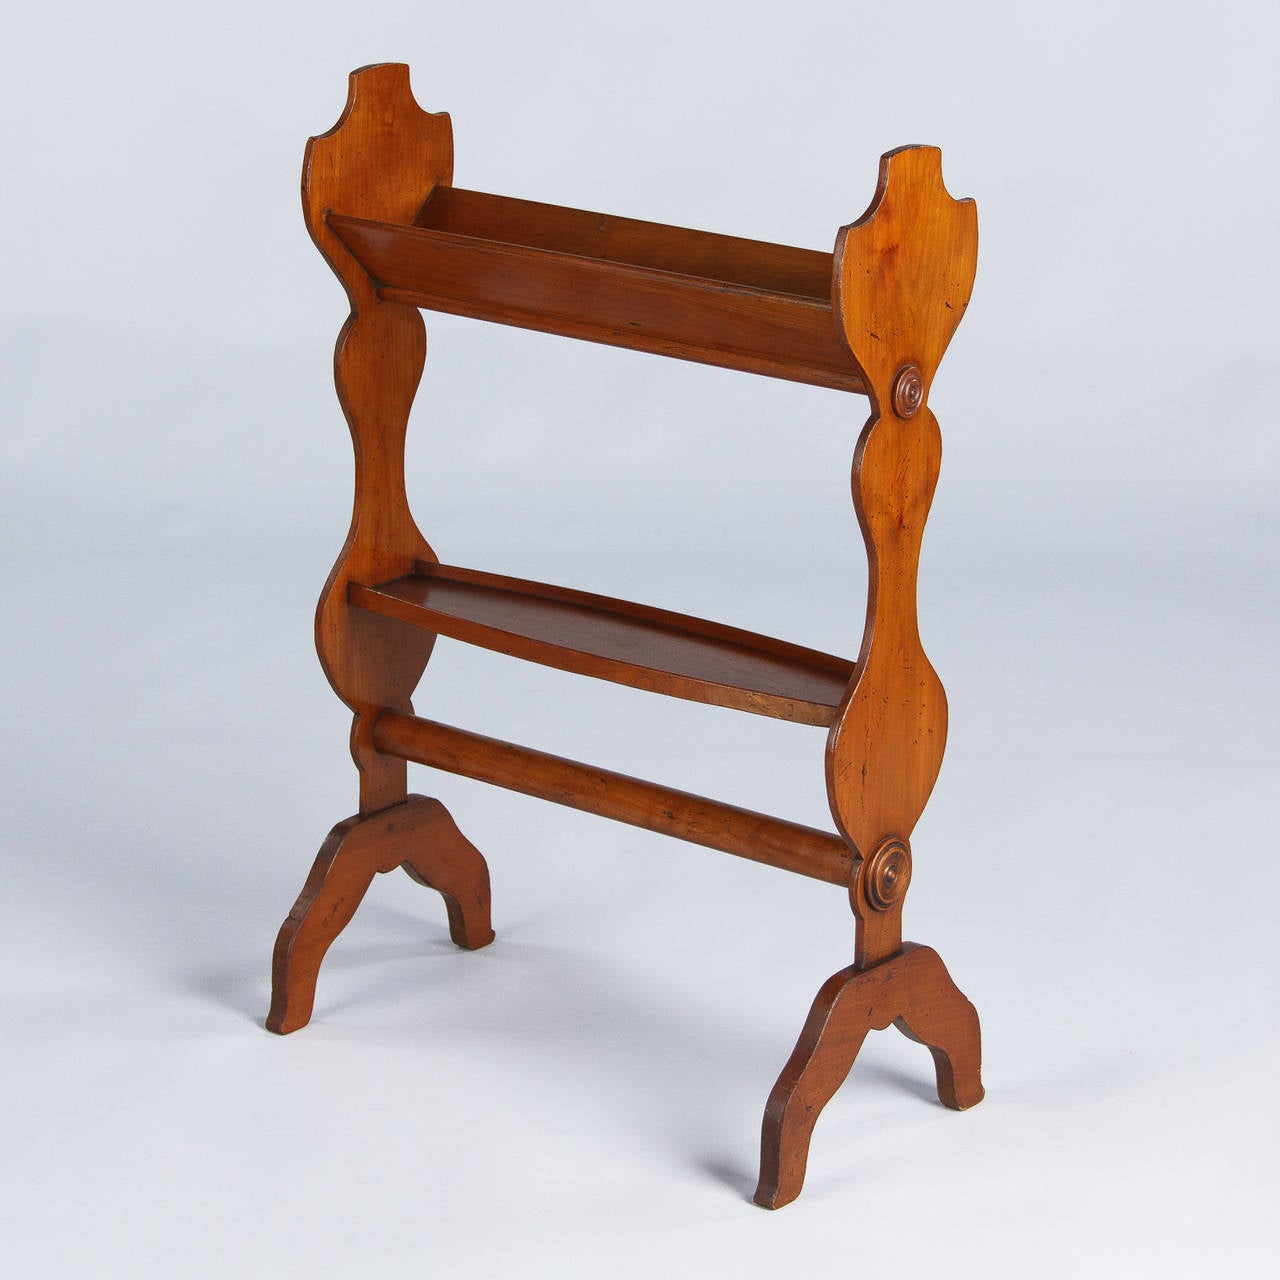 20th Century French Cherry Wood Seamstress Side Table, circa 1900s